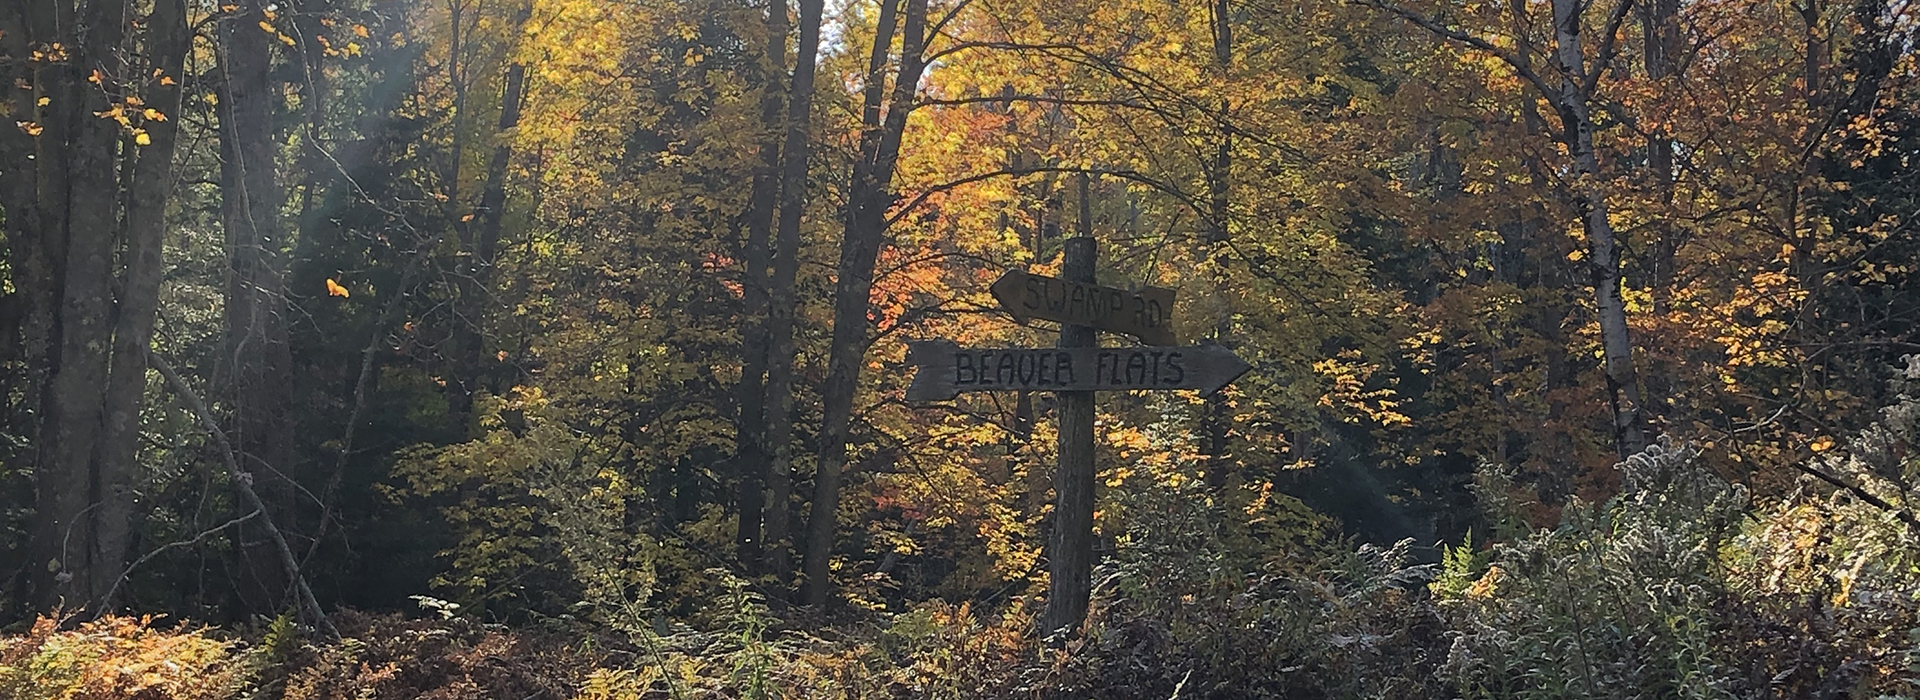 Fall trees in woods with wooden sign trail markers